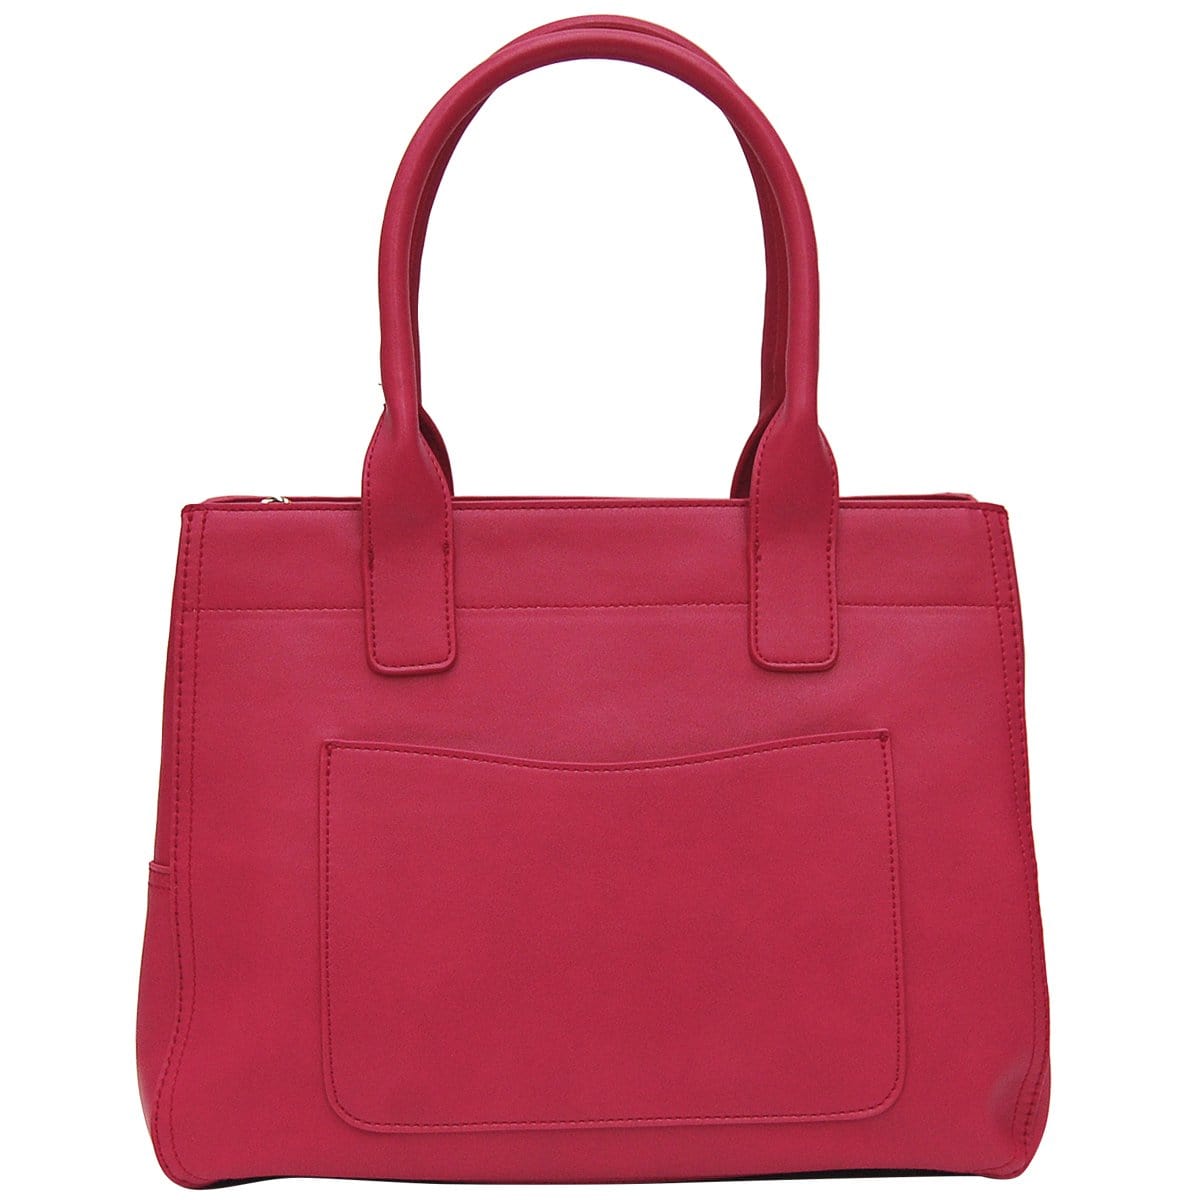 Monroe Tote - Soft Red Leather Look